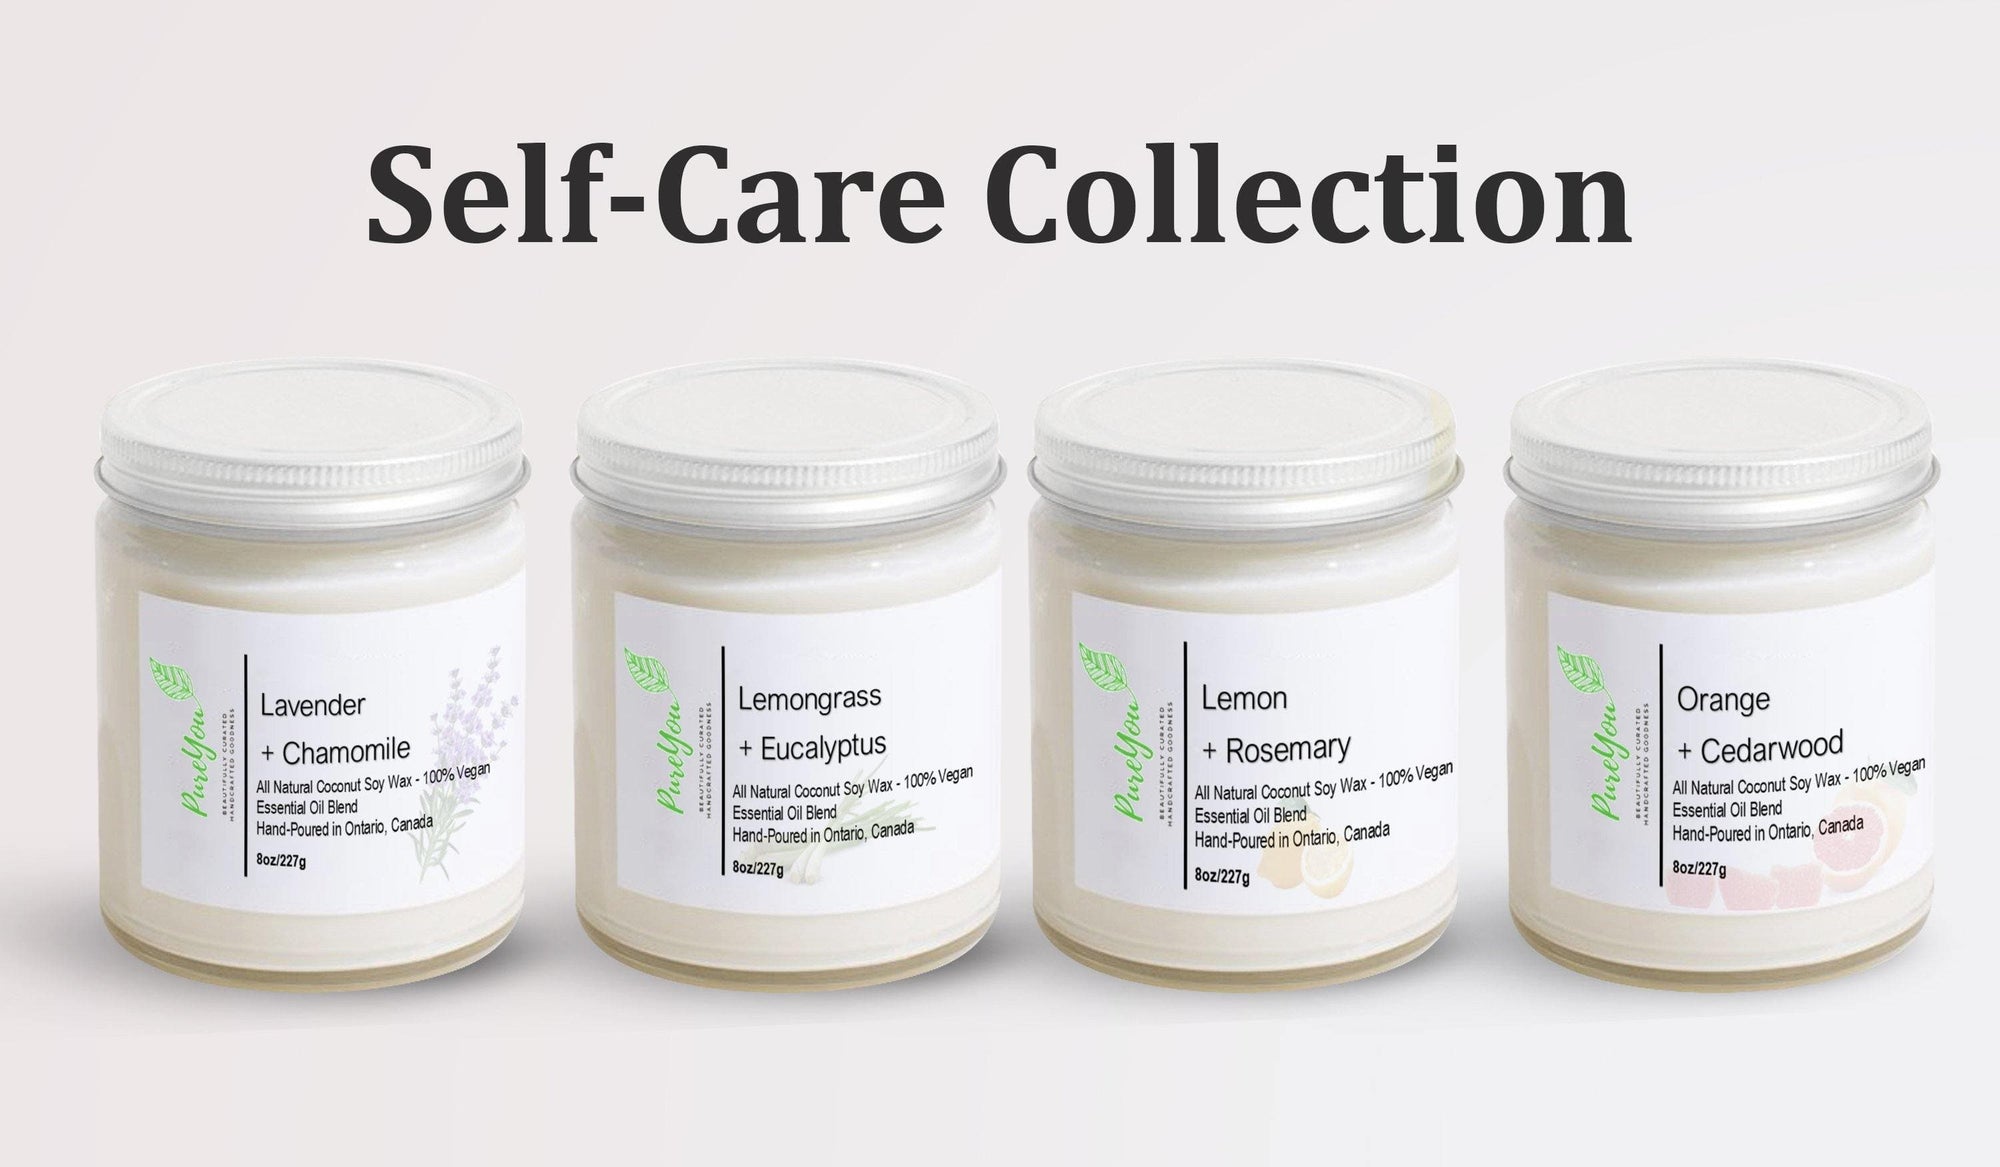 Self-Care Collection of Coconut Soy Wax Candles - PureYou Handmade